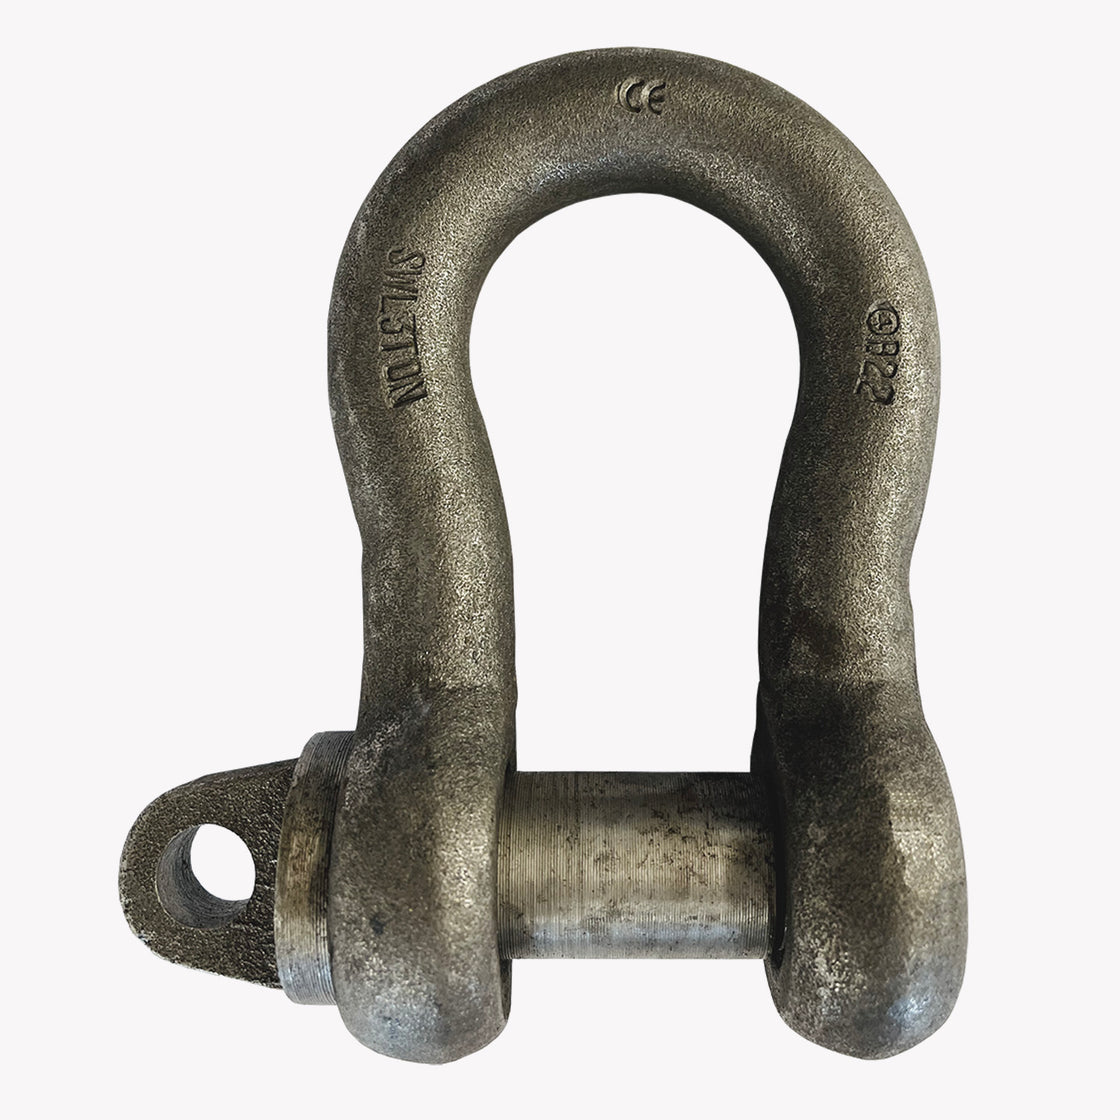 BS3032 LARGE BOW SHACKLE - BRITISH STANDARD (TABLE 3) - PGS Supplies 21 Ltd